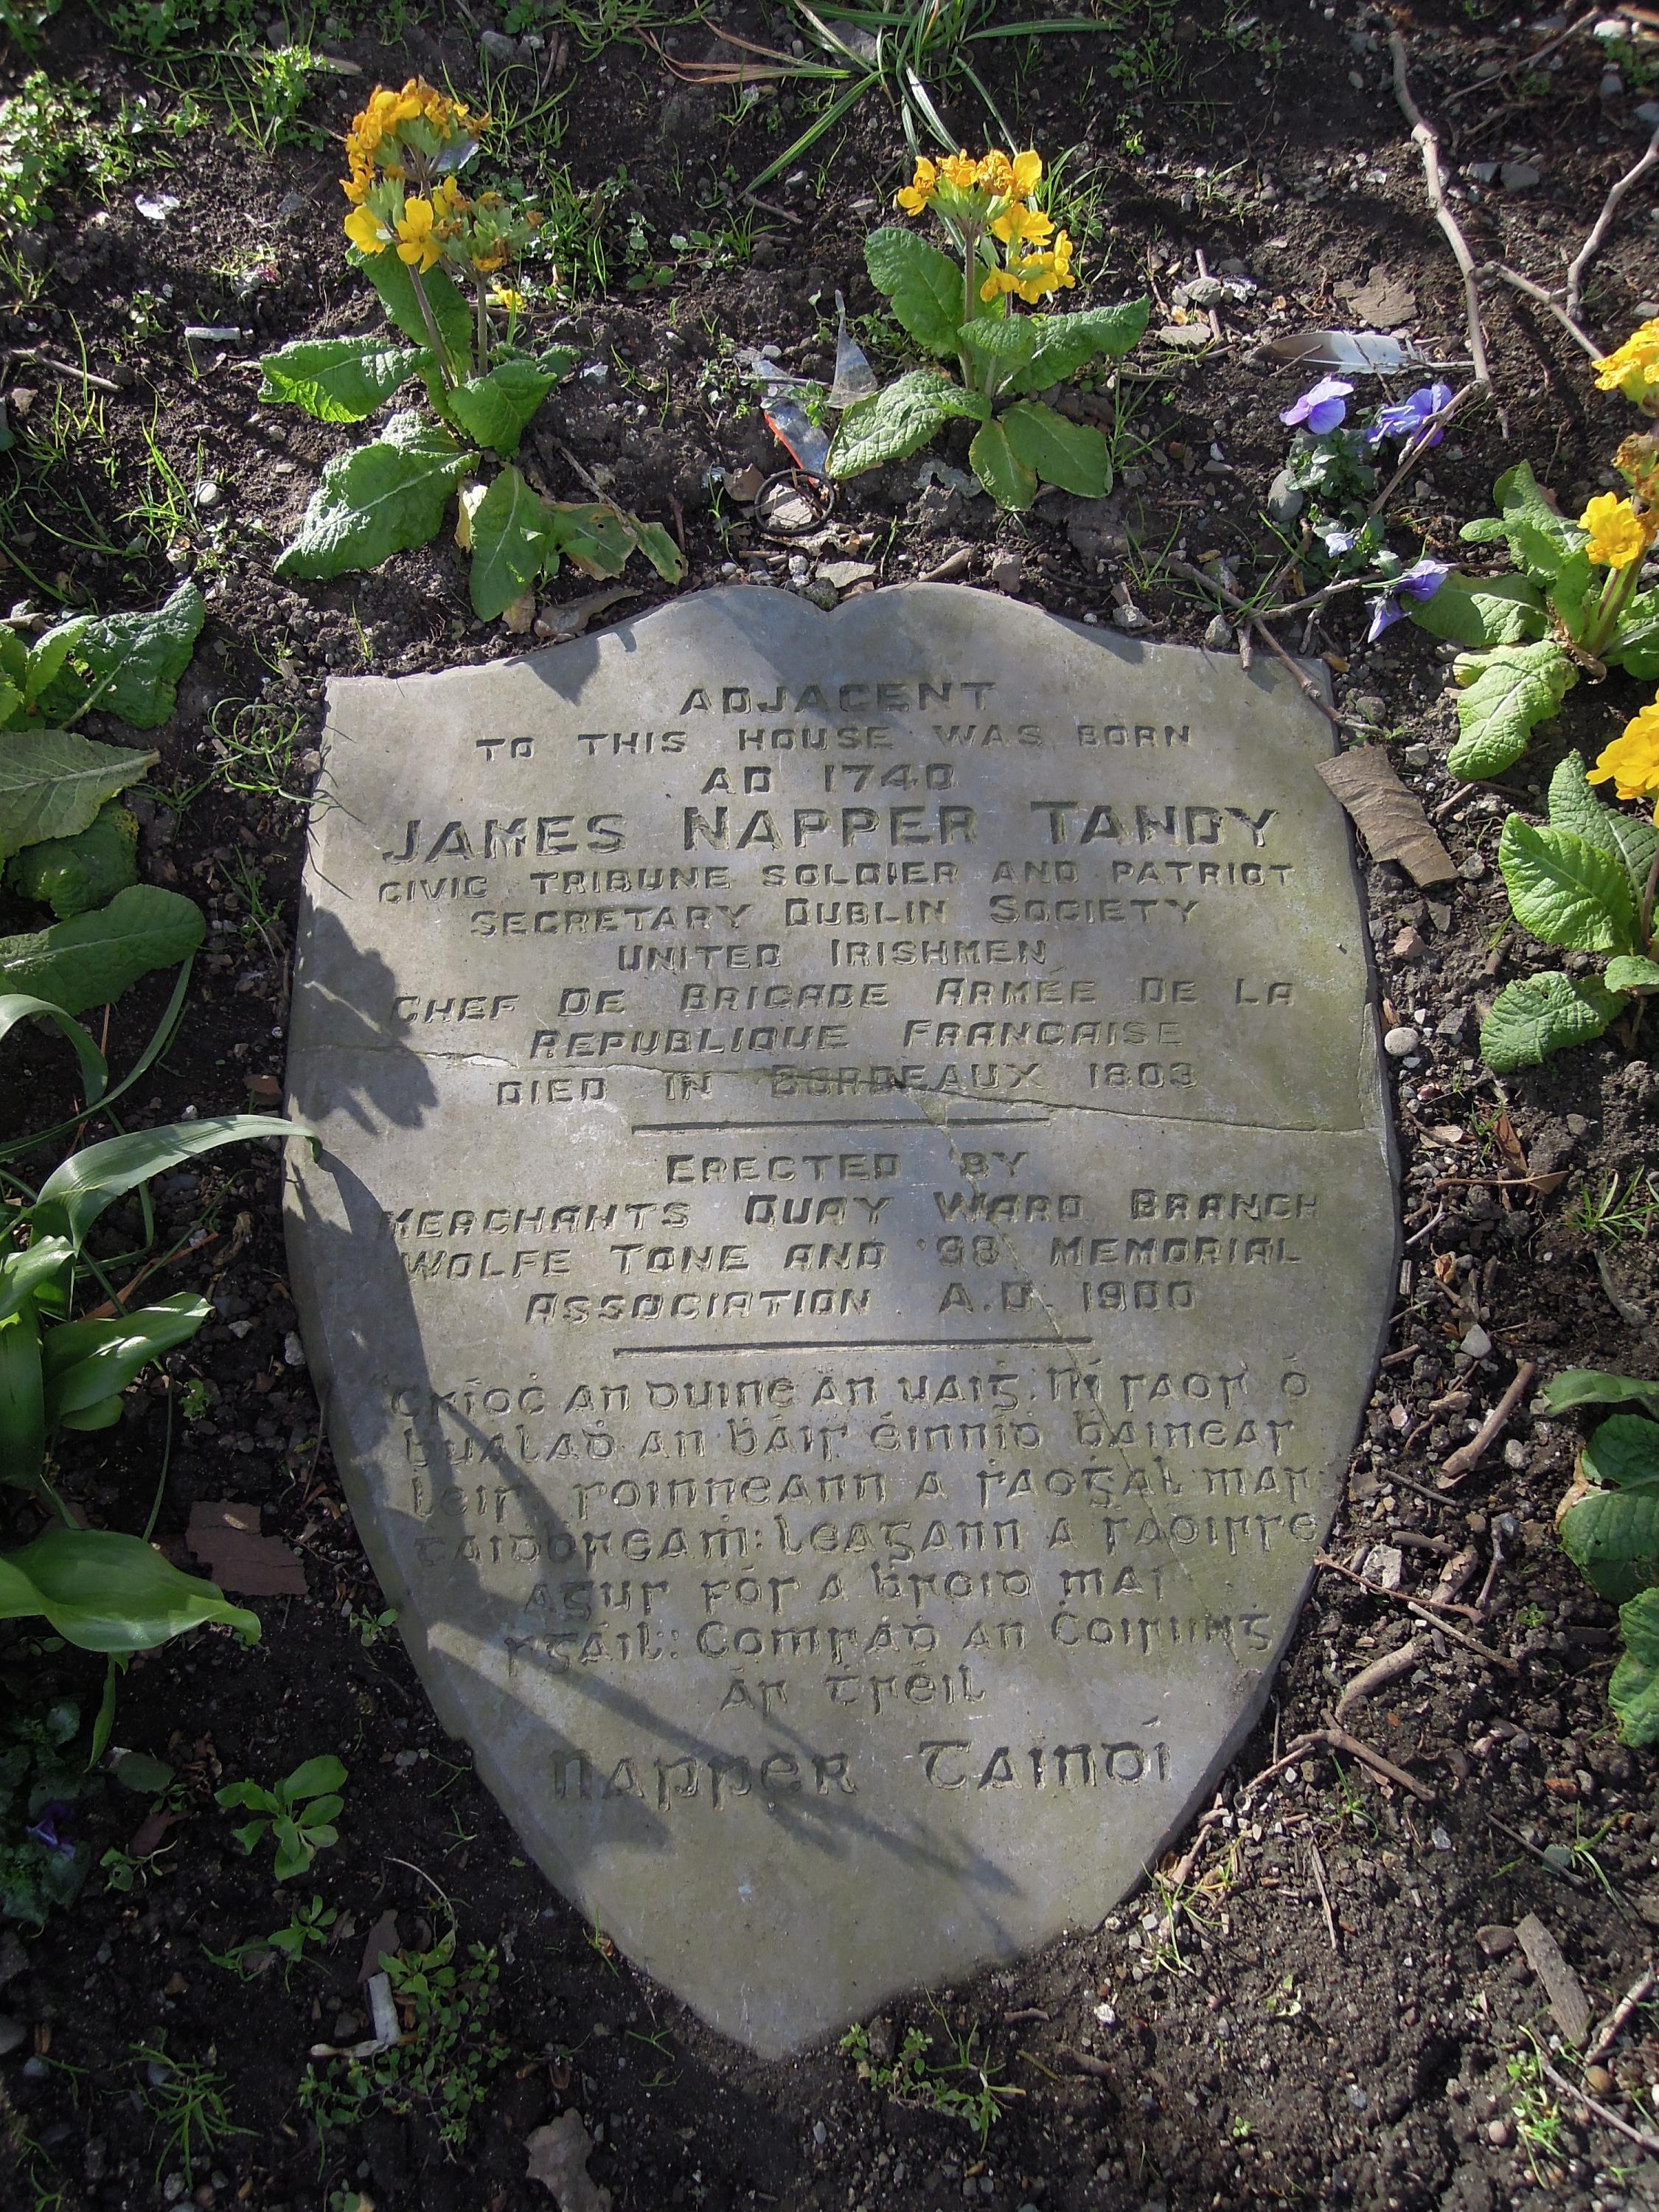 The Birthplace of James Napper Tandy: Dublin City